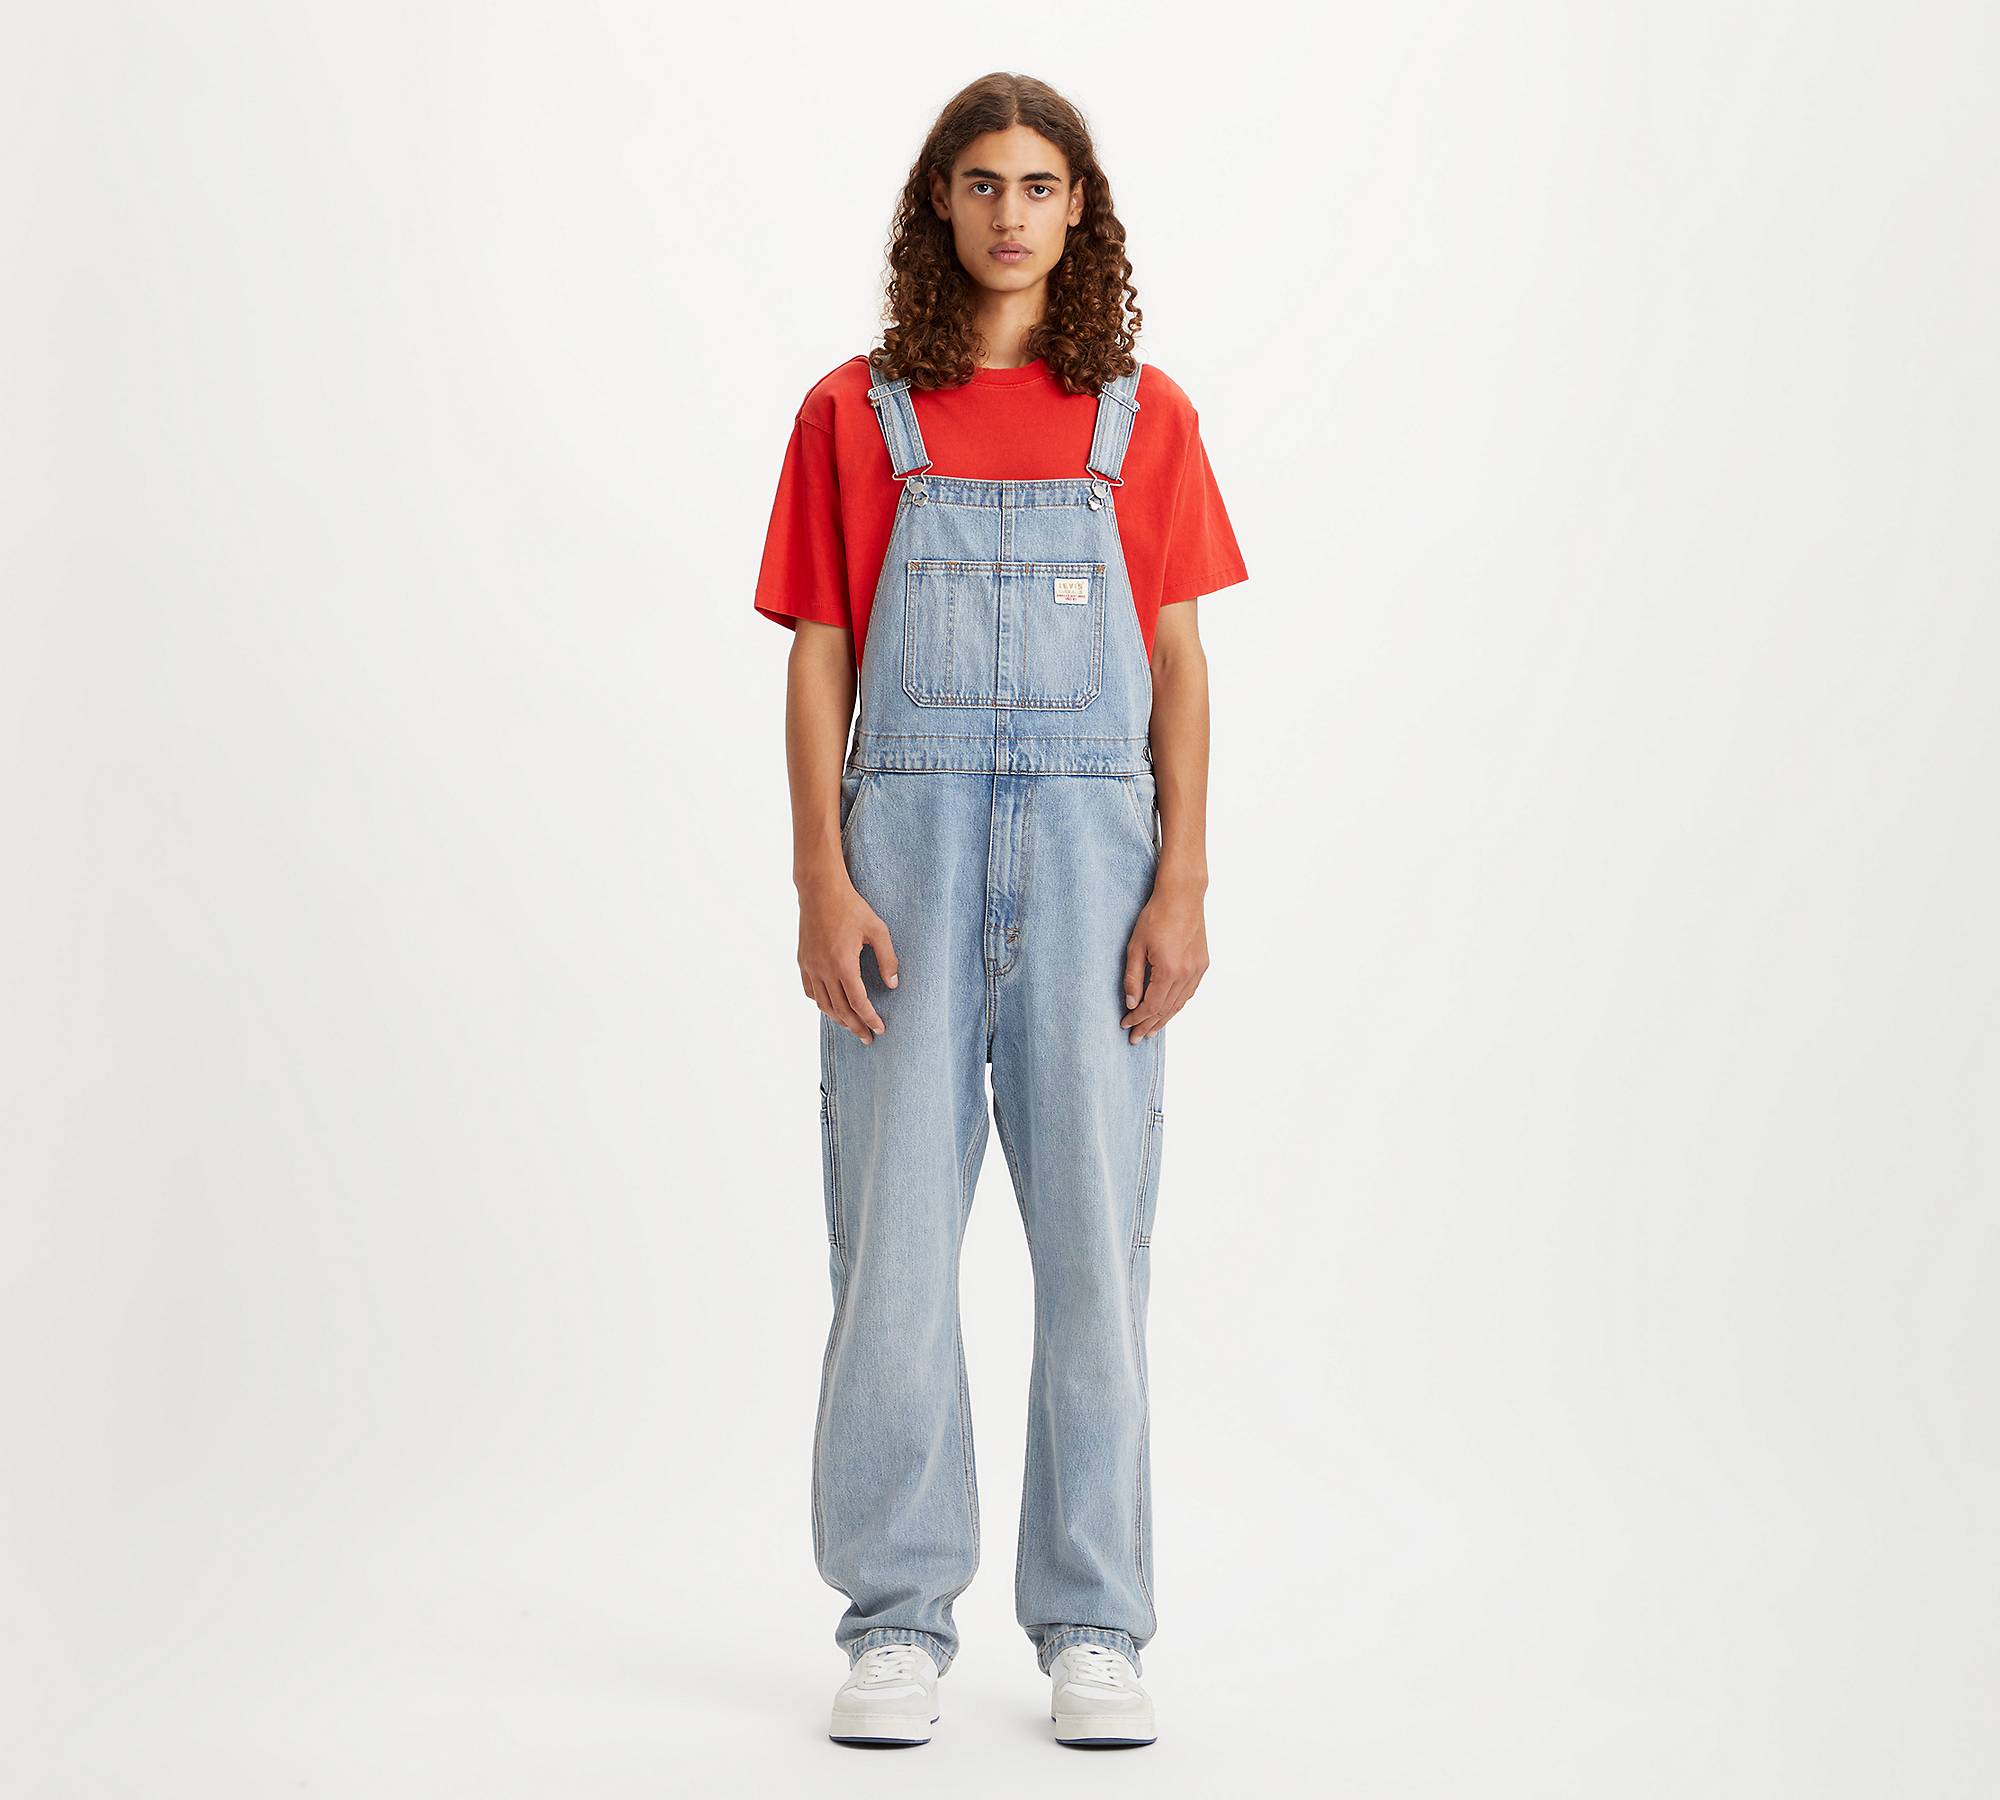 Levi's® Red Tab™ Overalls - Blue | Levi's® BE